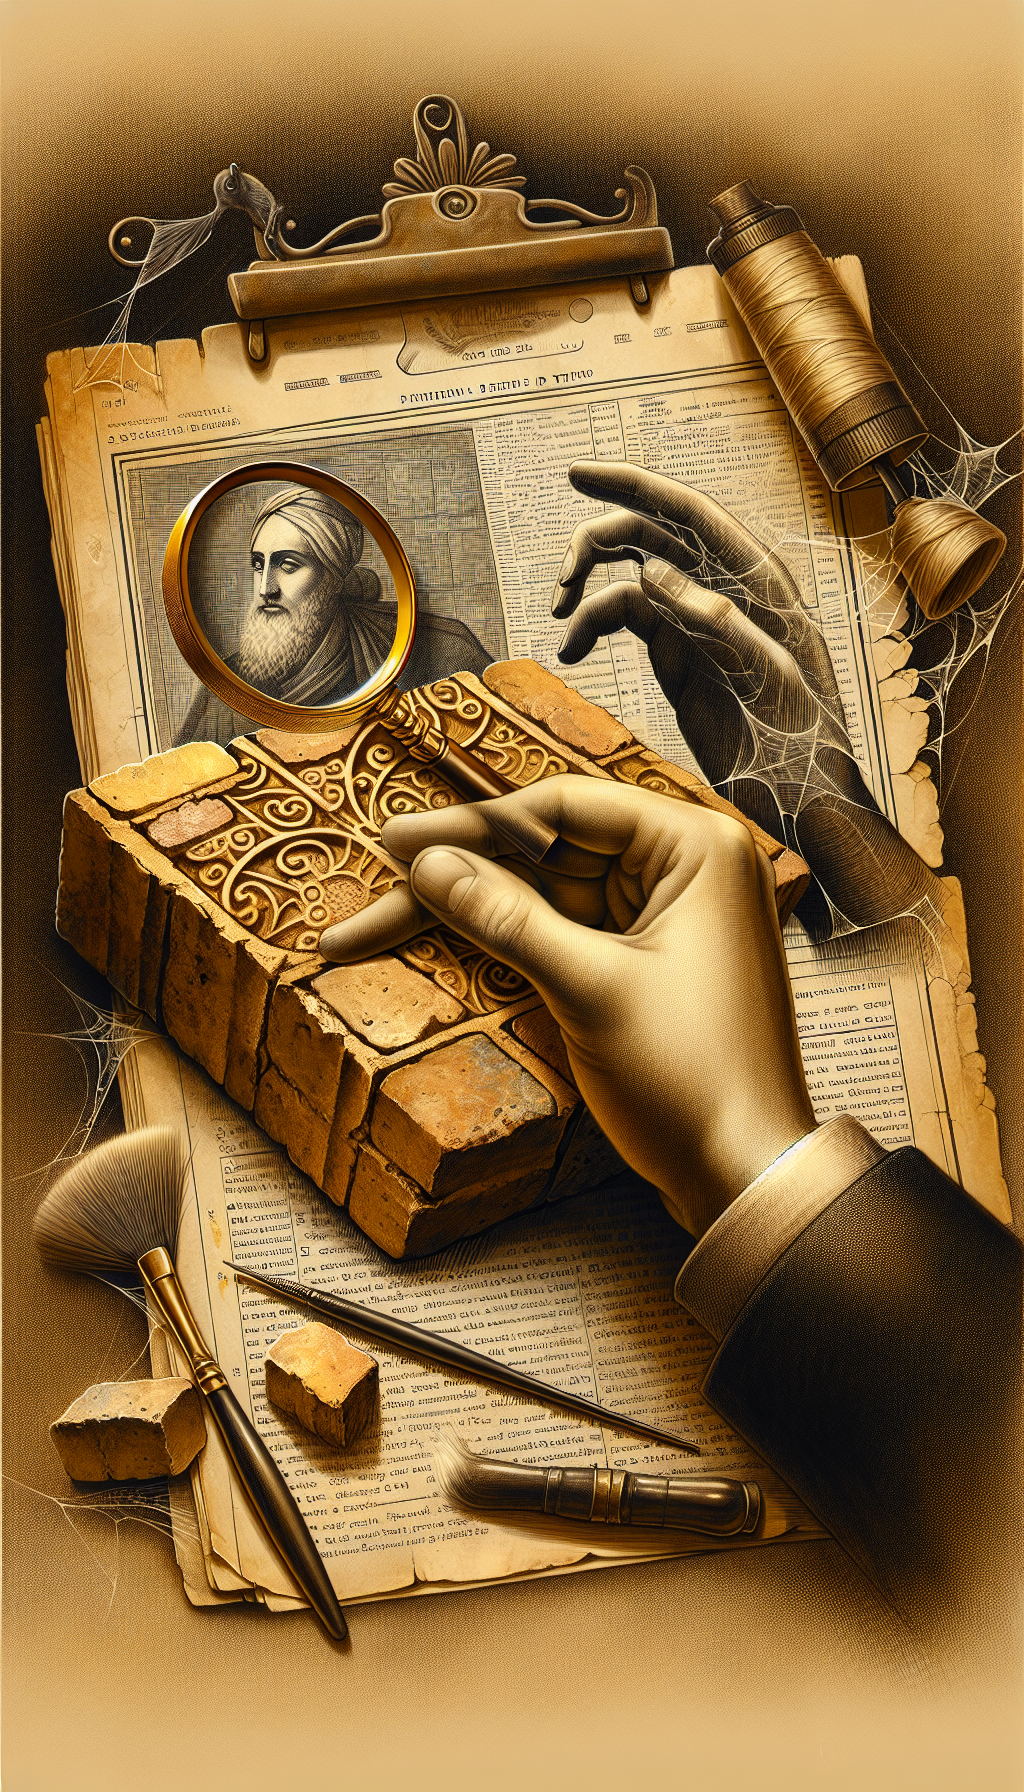 A hand cradles a magnifying glass, scrutinizing the intricate patterns on an antique brick, juxtaposed against a cobweb-covered, vintage encyclopedia entry on brick-making. The brick glows with a subtle golden sheen, implying its value. A semi-transparent layer of preservation tools like a brush and sealant casually cross the scene, suggesting maintenance. Styles vary from hyper-realistic detail on the brick to a sepia-toned, sketched background.